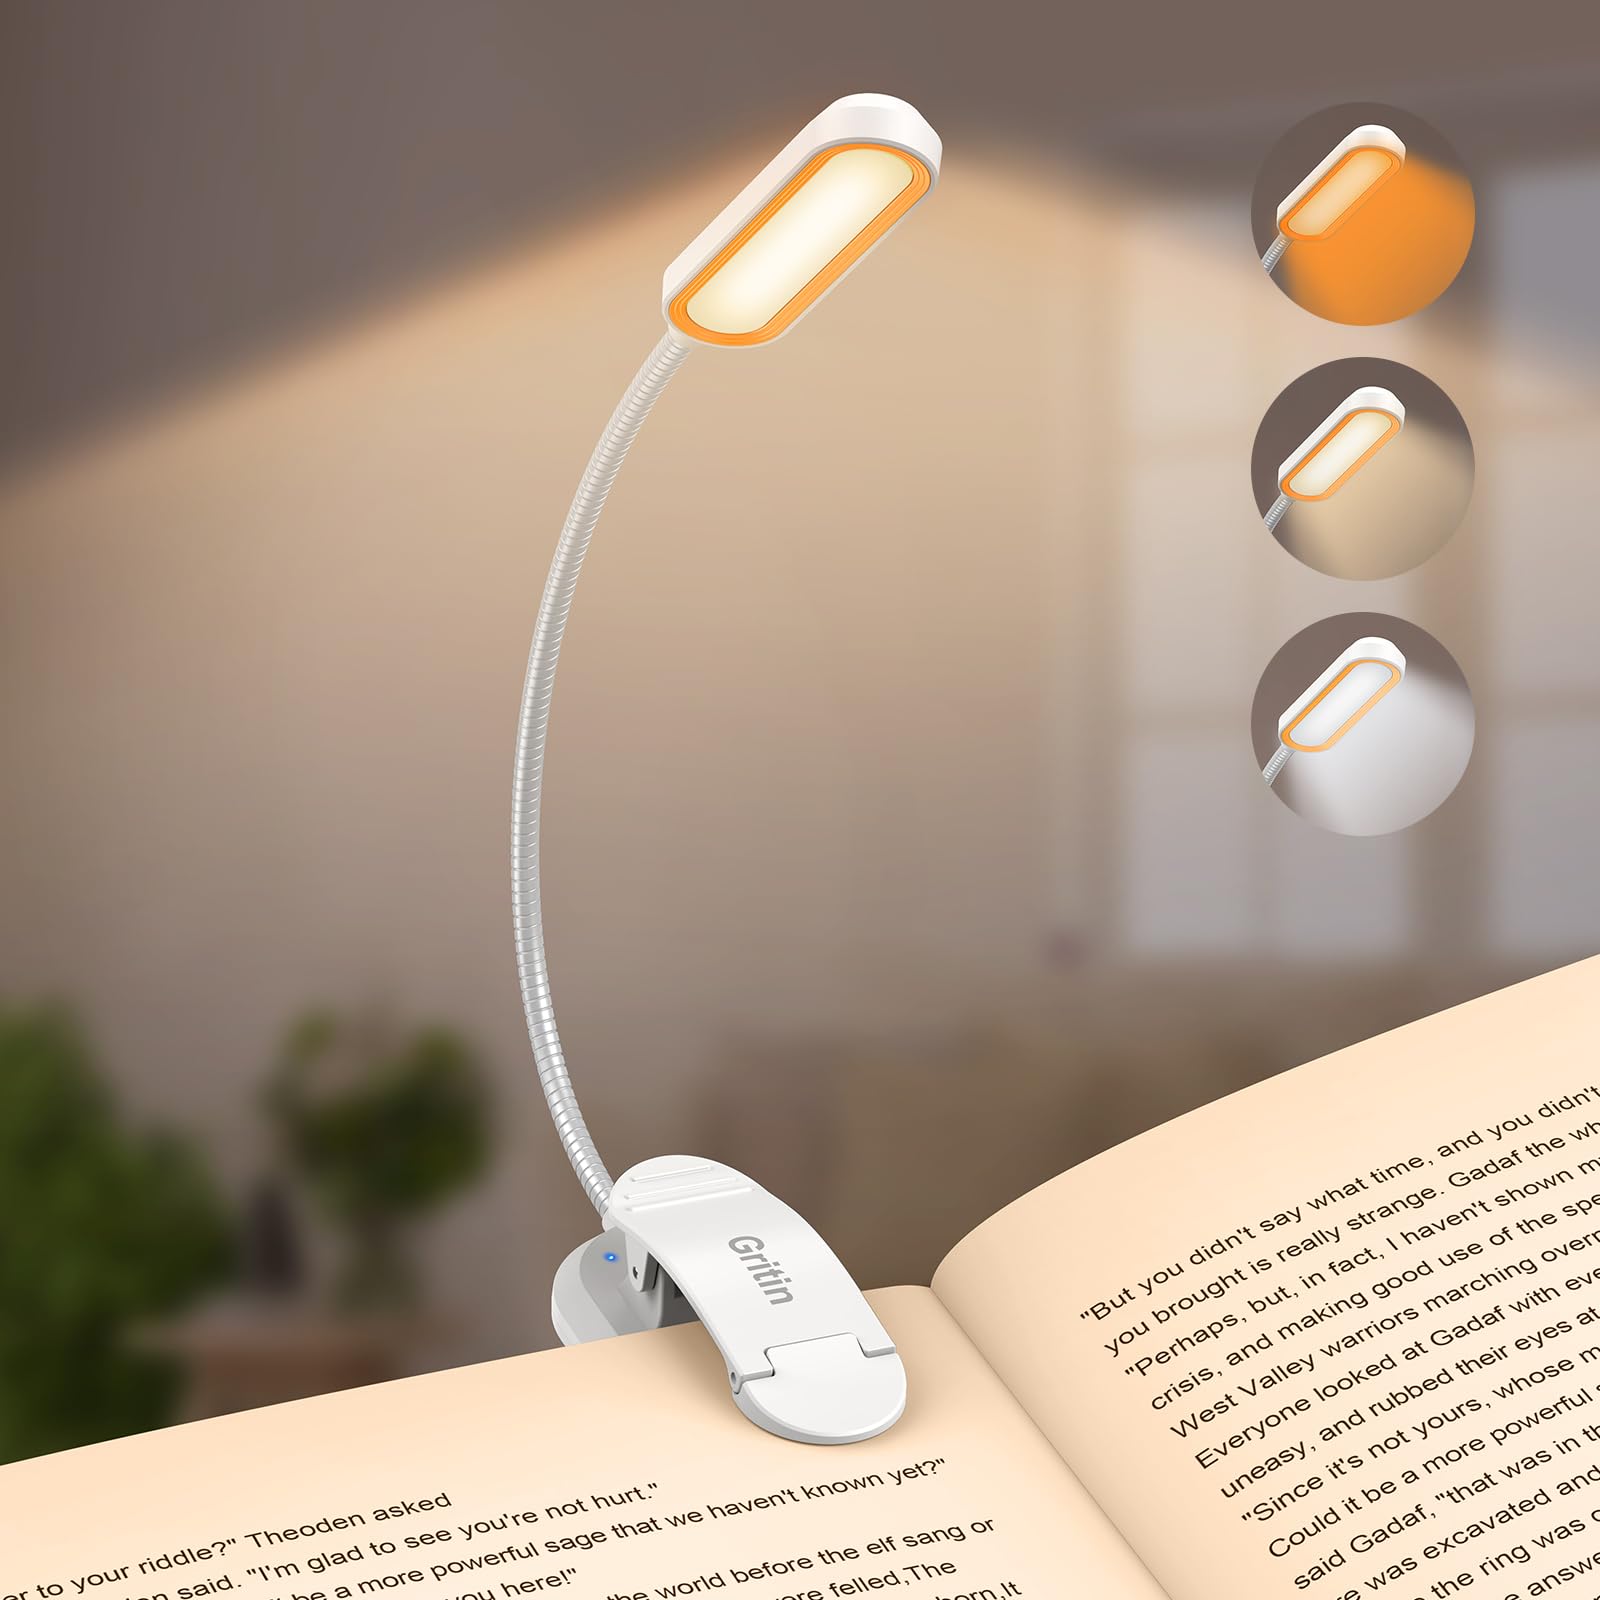 Gritin 11 LED Rechargeable Reading Light Clip on Book